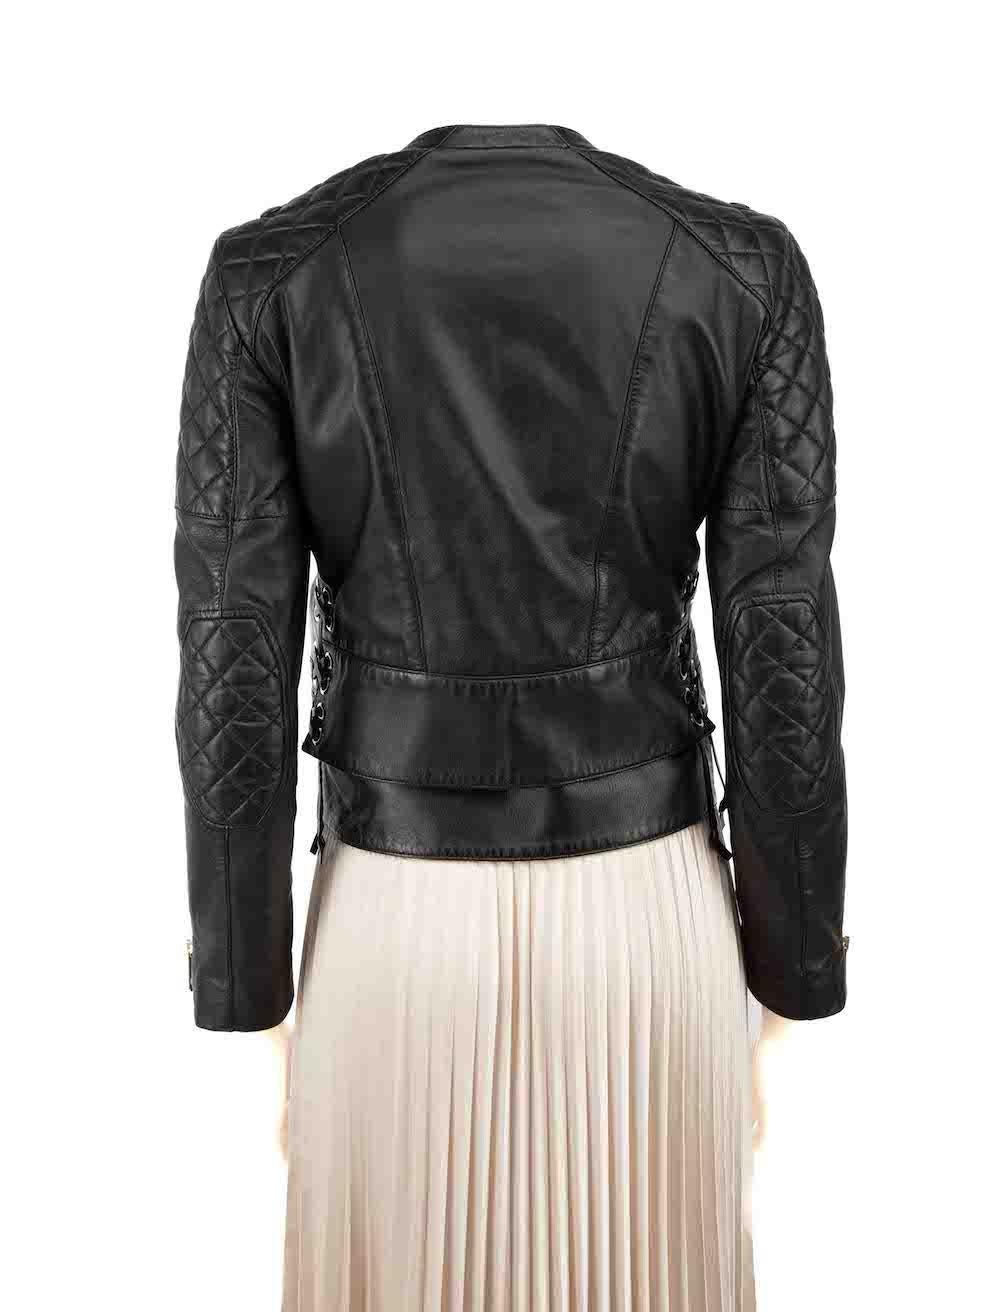 Balenciaga Black Quilted Leather Jacket Size XS In Good Condition For Sale In London, GB